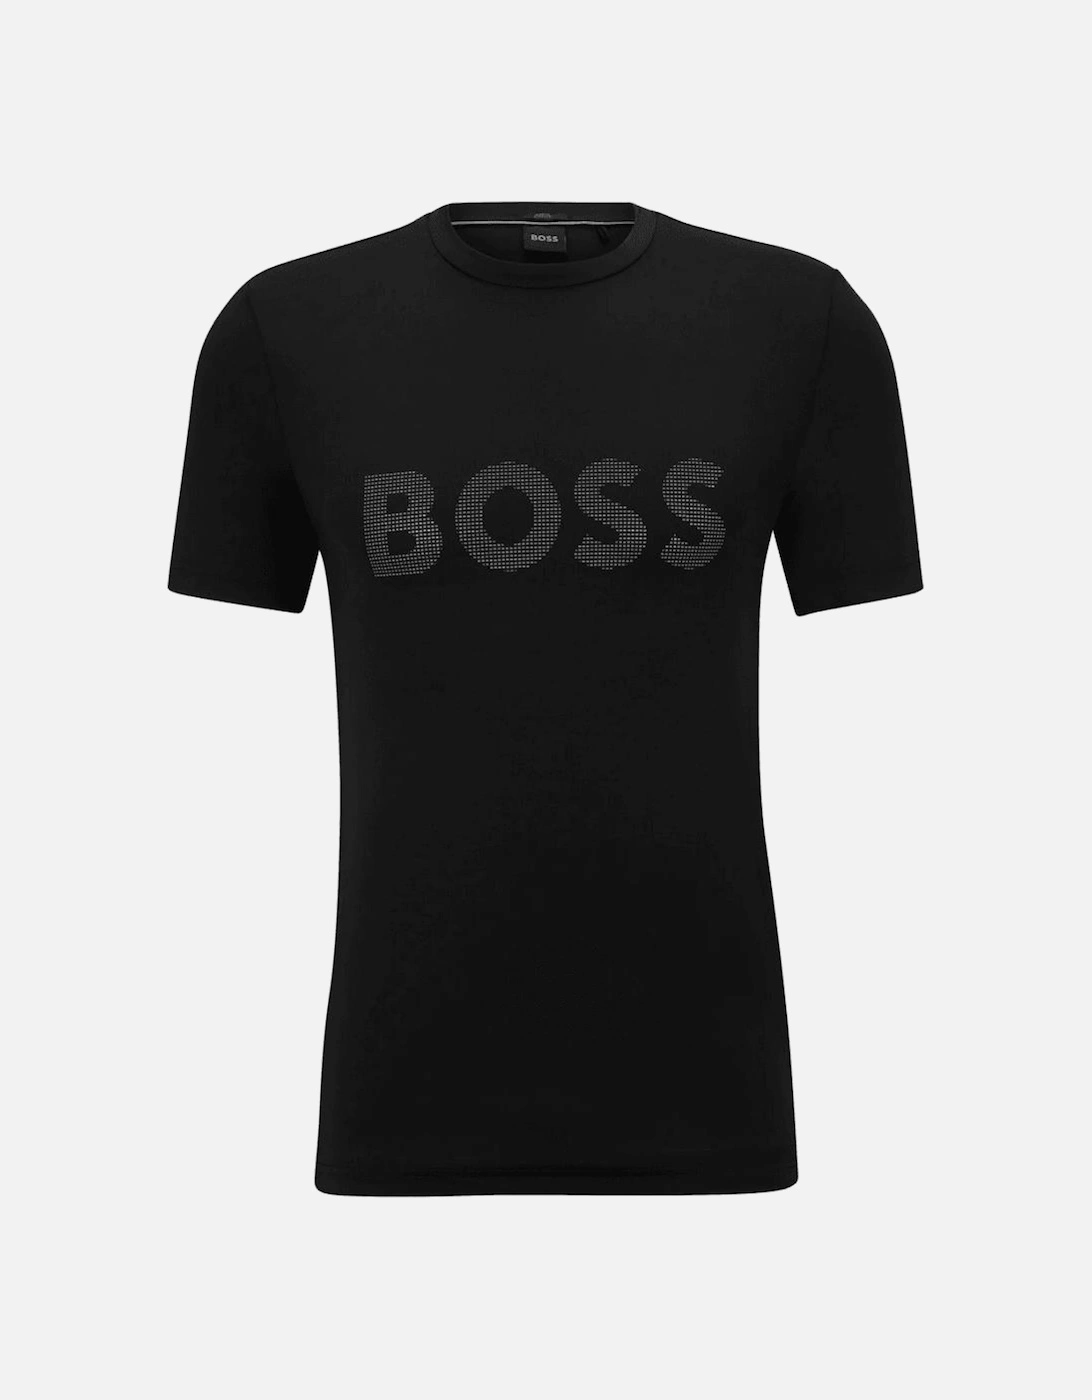 Tee Active Reflective Logo Slim Fit Black T-Shirt, 4 of 3